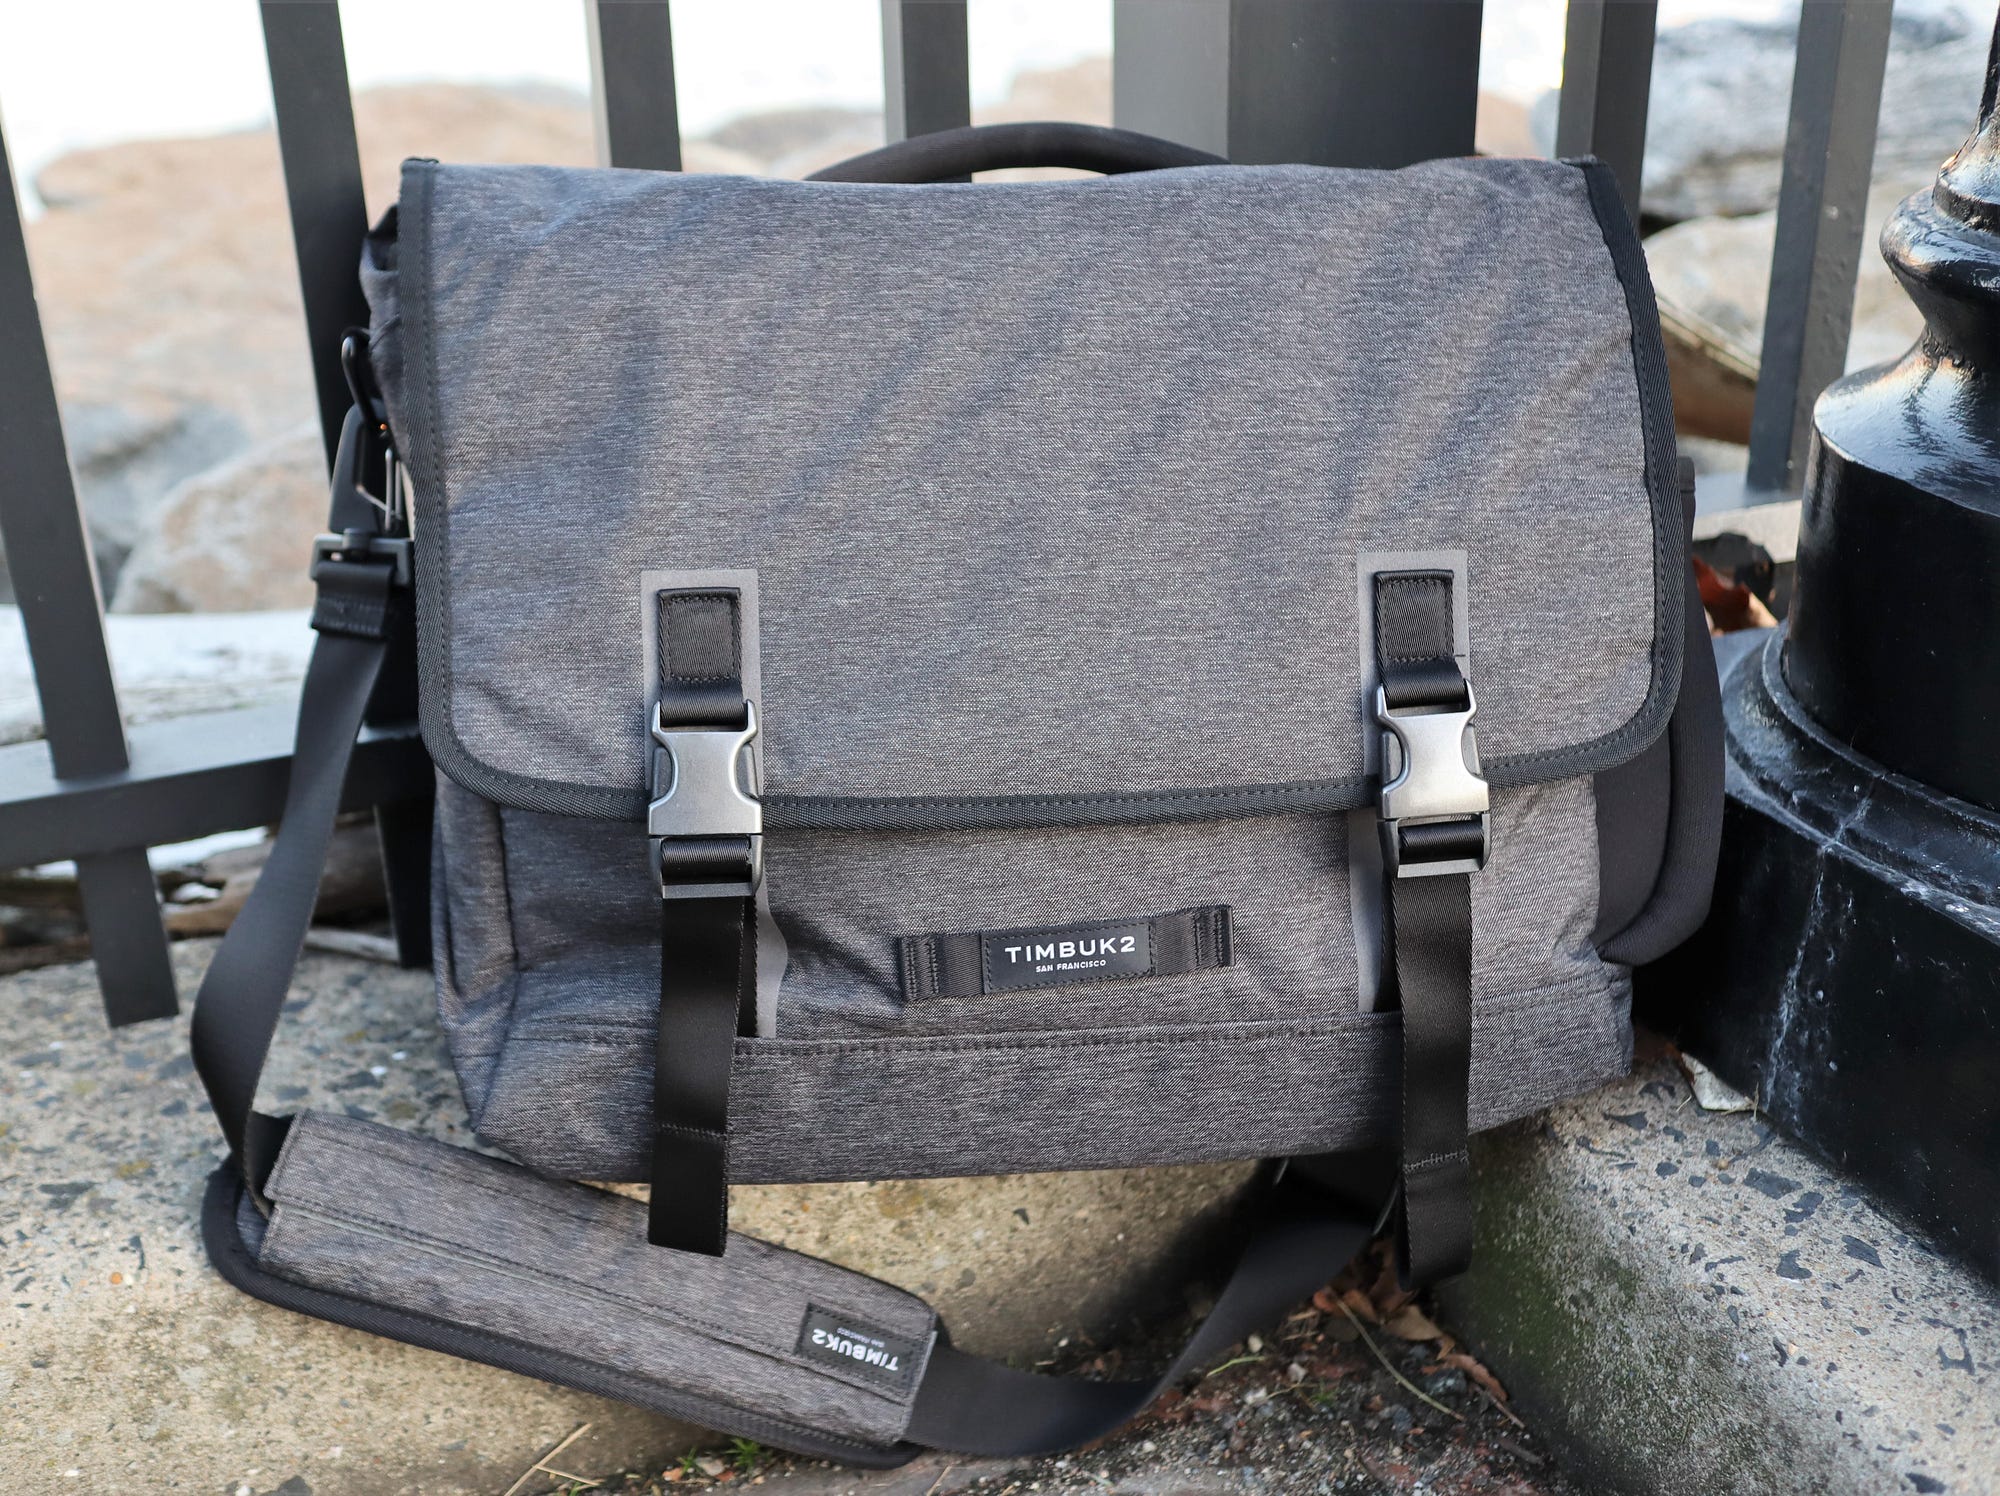 Timbuk2 Closer Laptop Briefcase Review | by Geoff | Pangolins with Packs